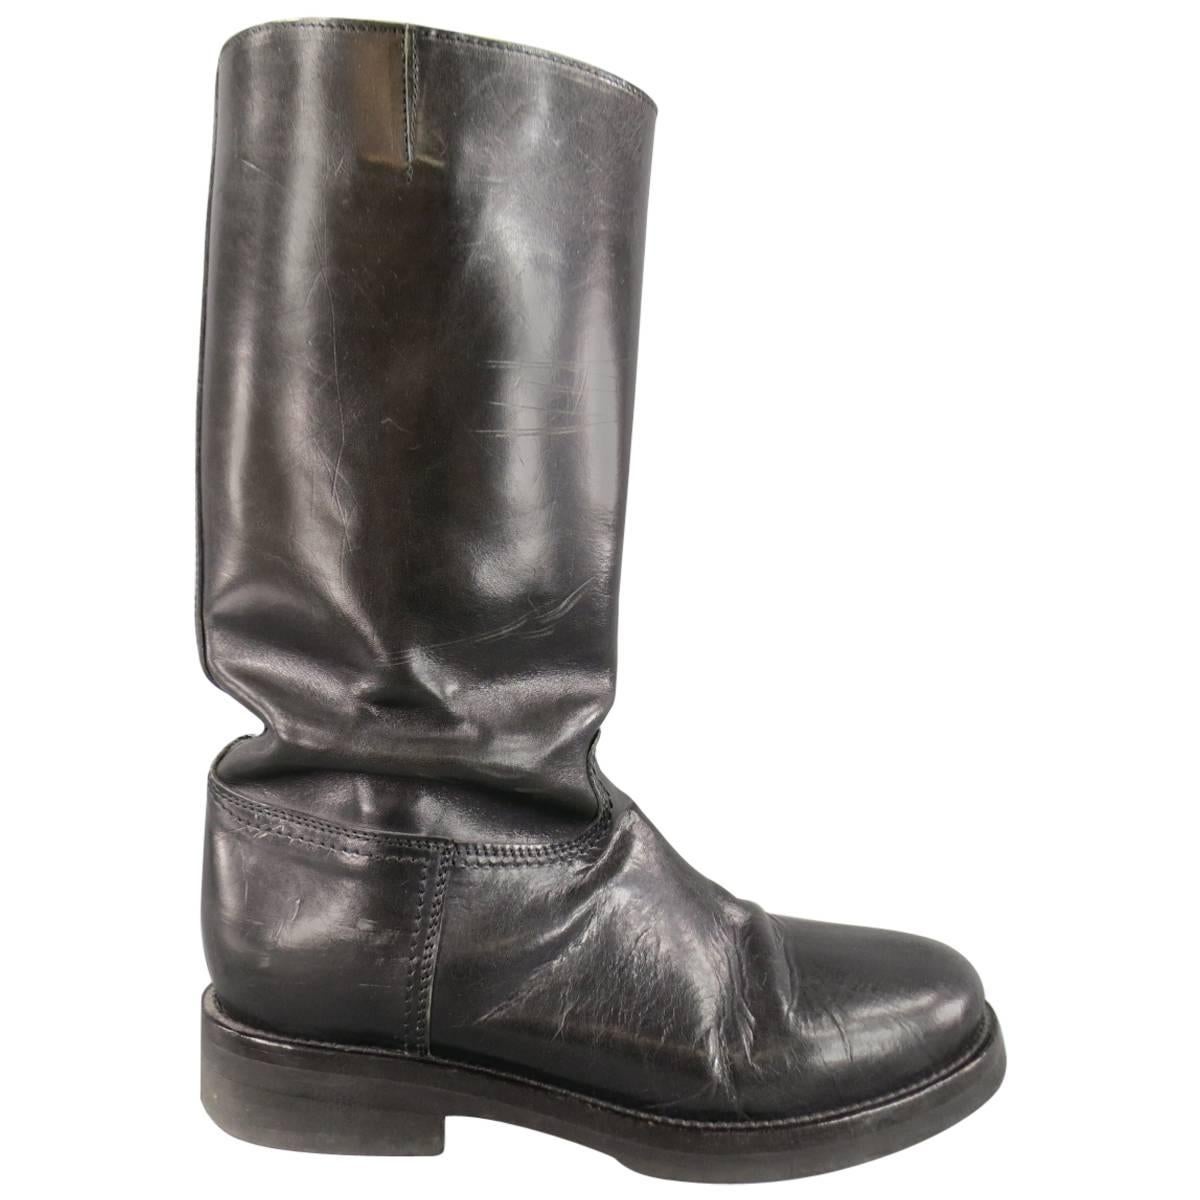 Men's ANN DEMEULEMEESTER Size 8 Black Leather Tall Boots